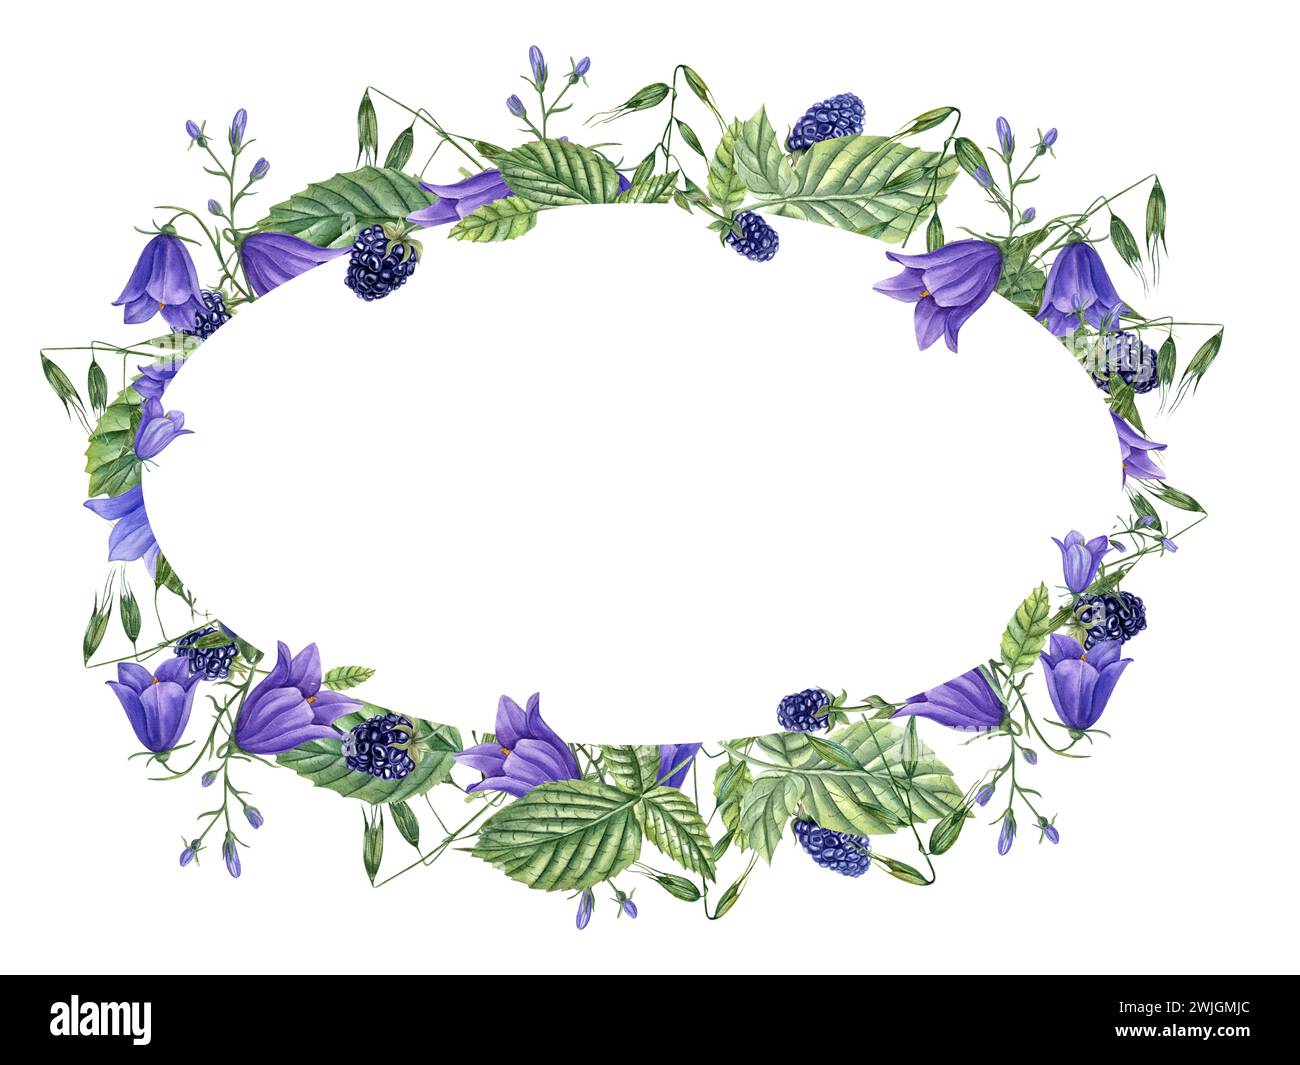 Frame with ripe aromatic Blackberries, meadow Herbs and Flowers. Berries, campanula, avena. Dewberry, bramble. Watercolor illustration for template Stock Photo